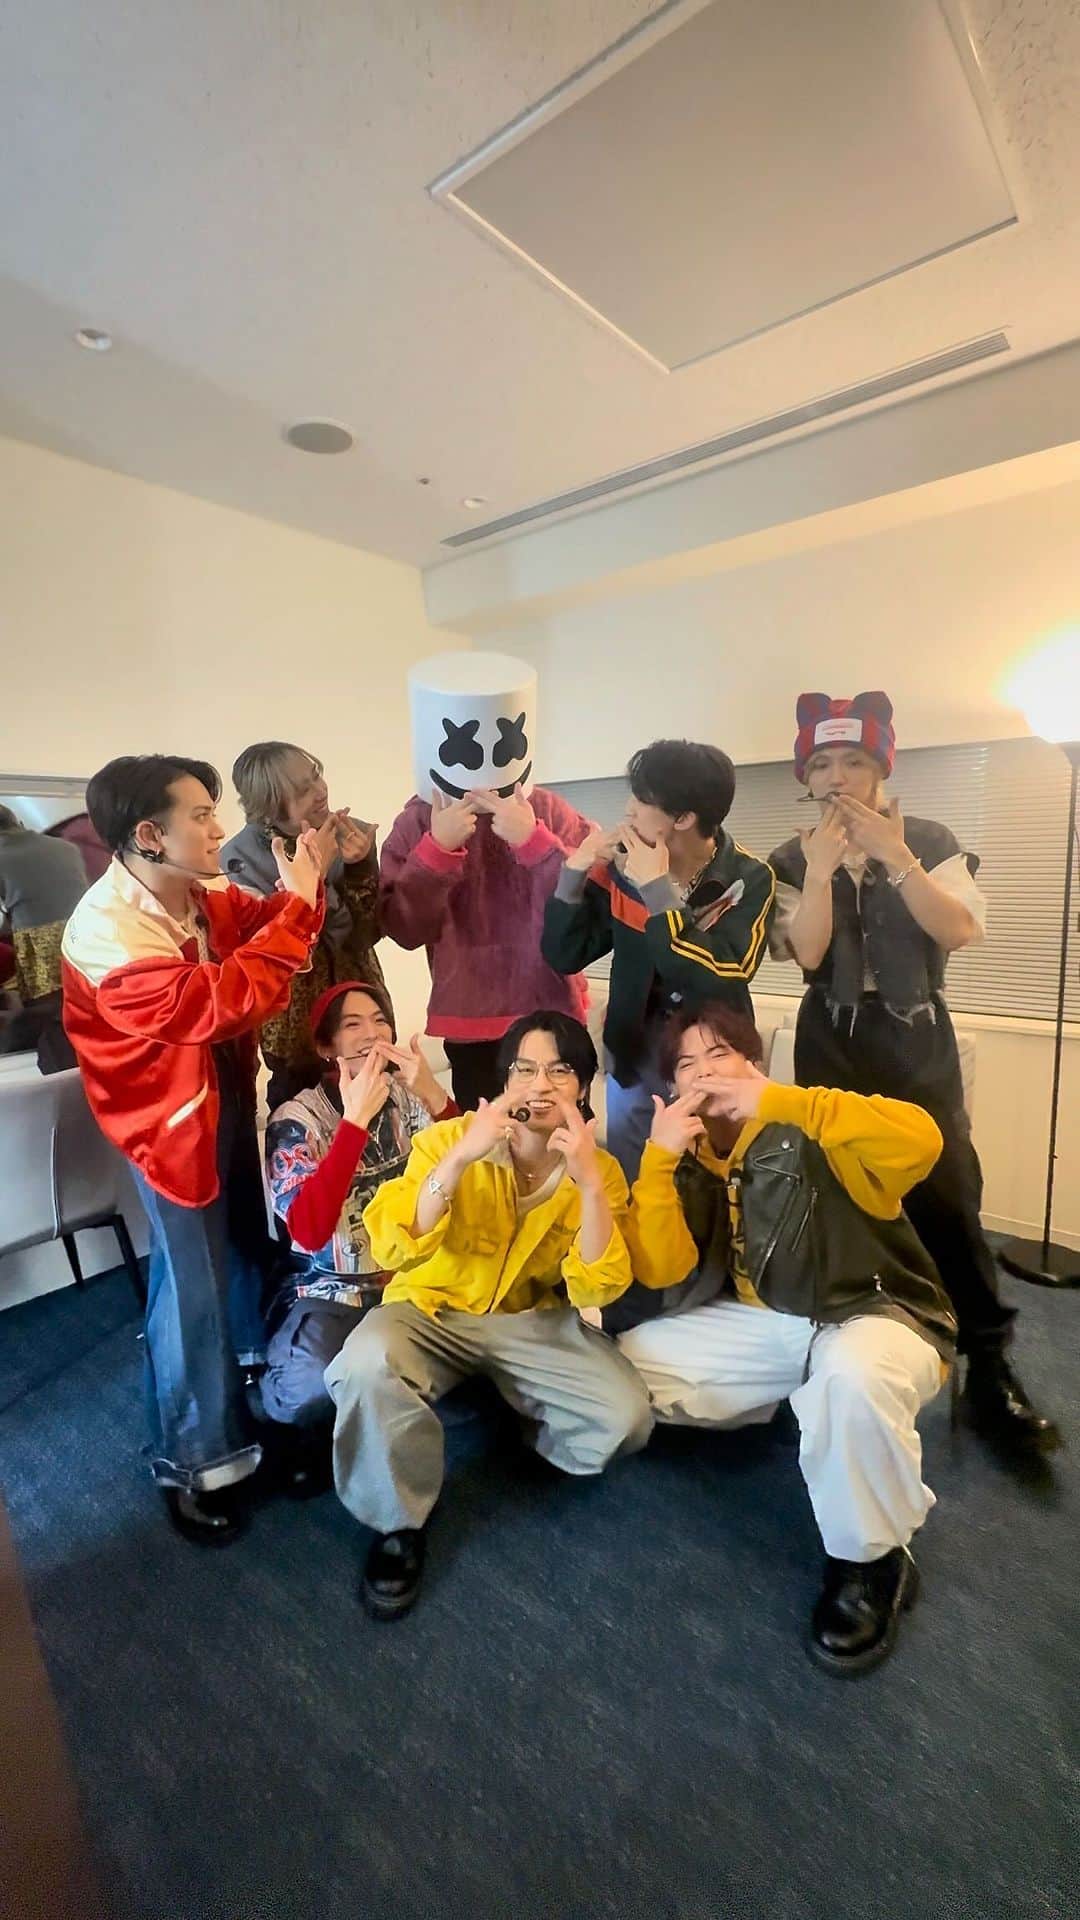 Travis Japan（トラジャ）のインスタグラム：「Candy Kiss Challenge🍭💋 ~with MARSHMELLO~  @marshmello Thank you for dancing with us!! We look forward to working with you again😆✨  #RoadtoA #CandyKiss  #TJgram #WorldwideTJ #TravisJapan」